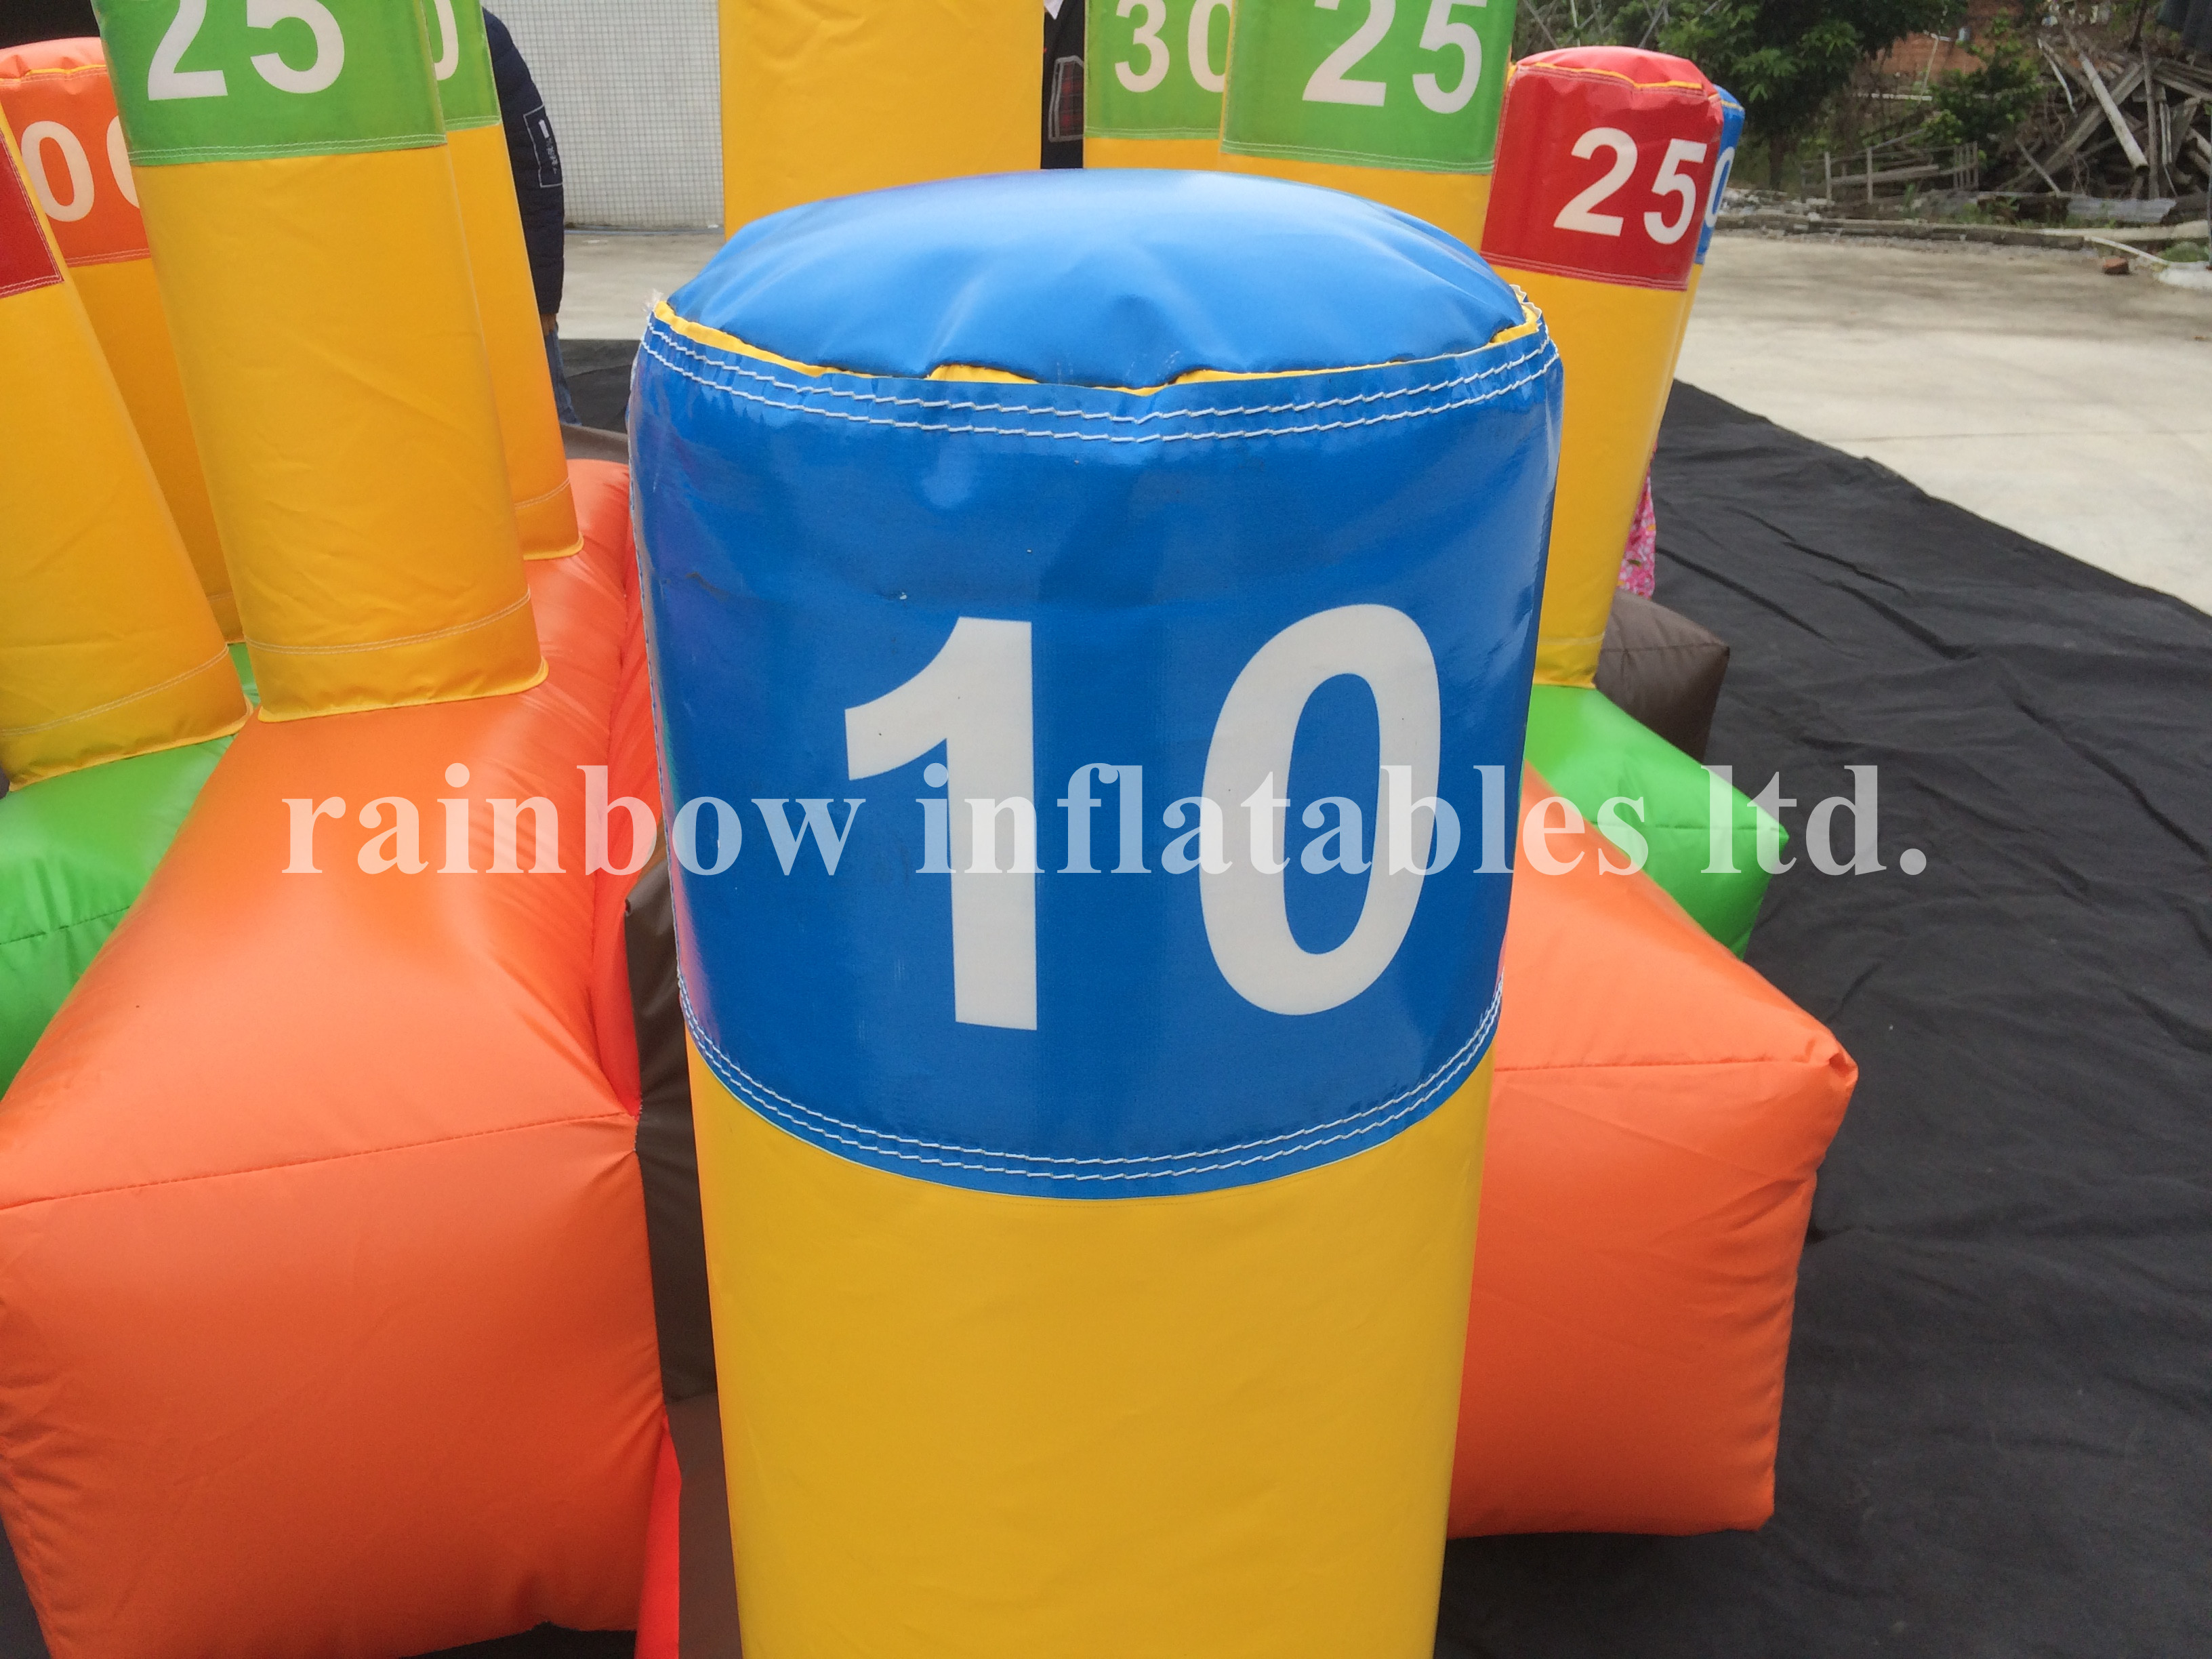 RB9117（3.5x3m ） Inflatable Commercial Ring Toss Game /Ring Toss Challenge Games